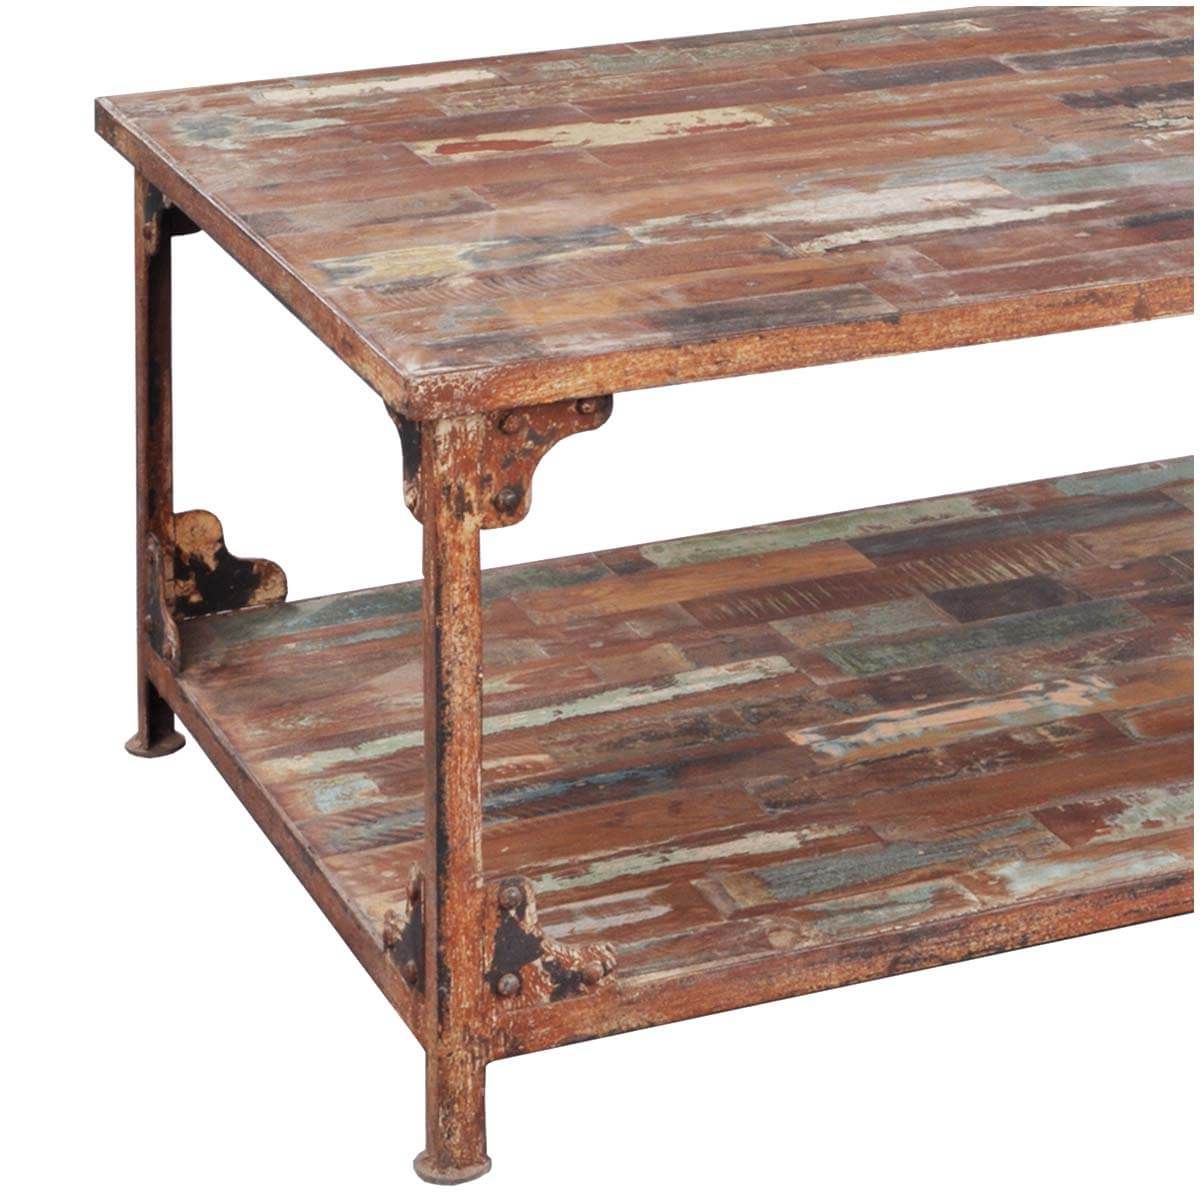 Distressed Iron 4 Shelf Desks Regarding 2018 Distressed Reclaimed Wood Wrought Iron Industrial Rustic Coffee Table (View 4 of 15)